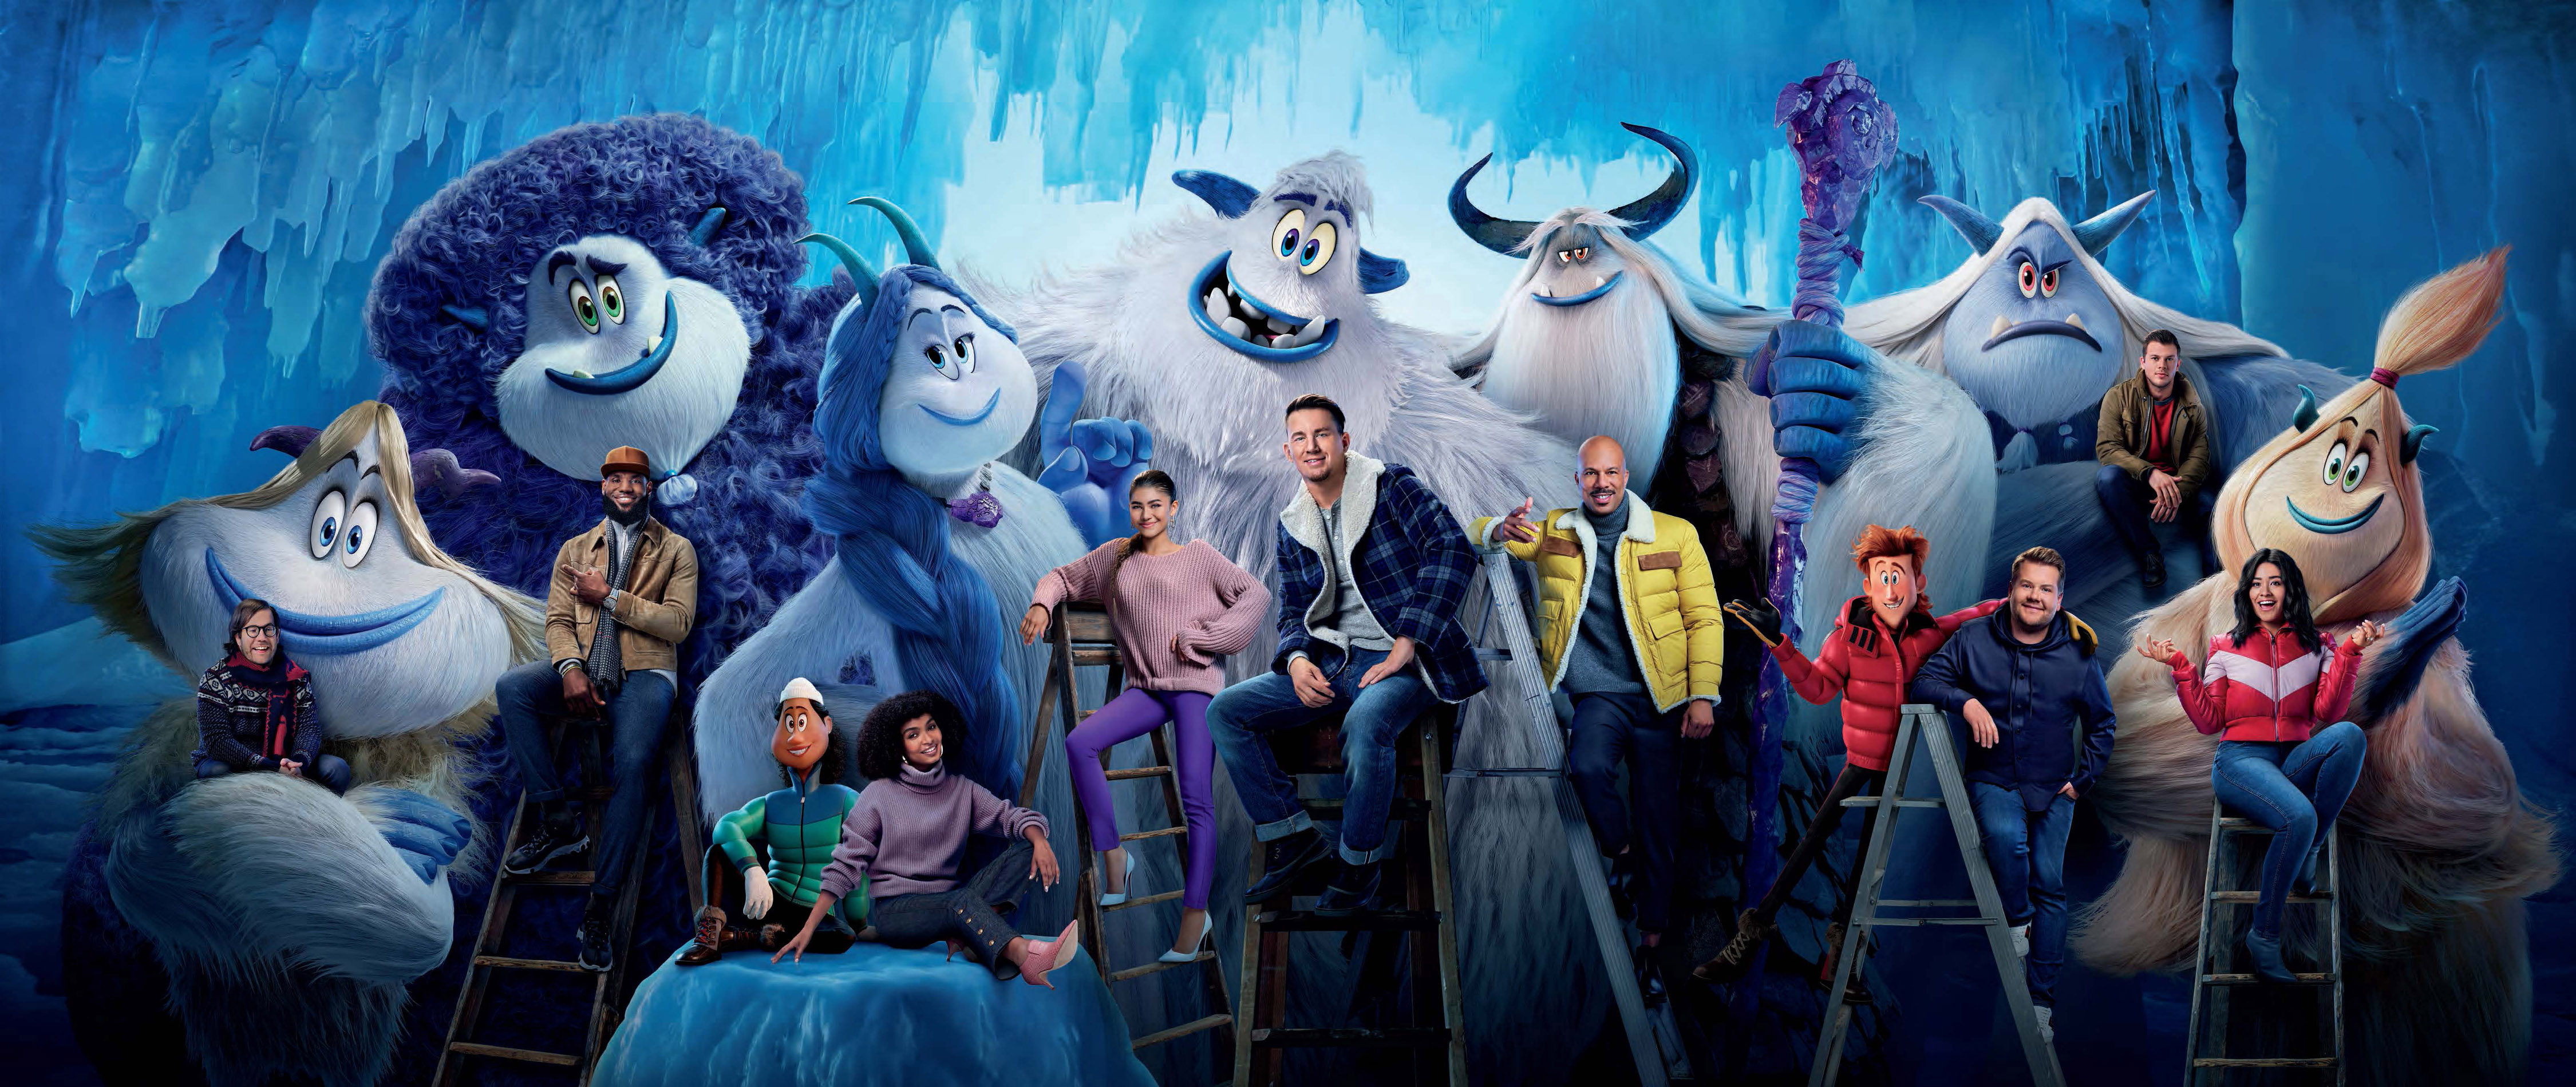 Smallfoot' DVD Review